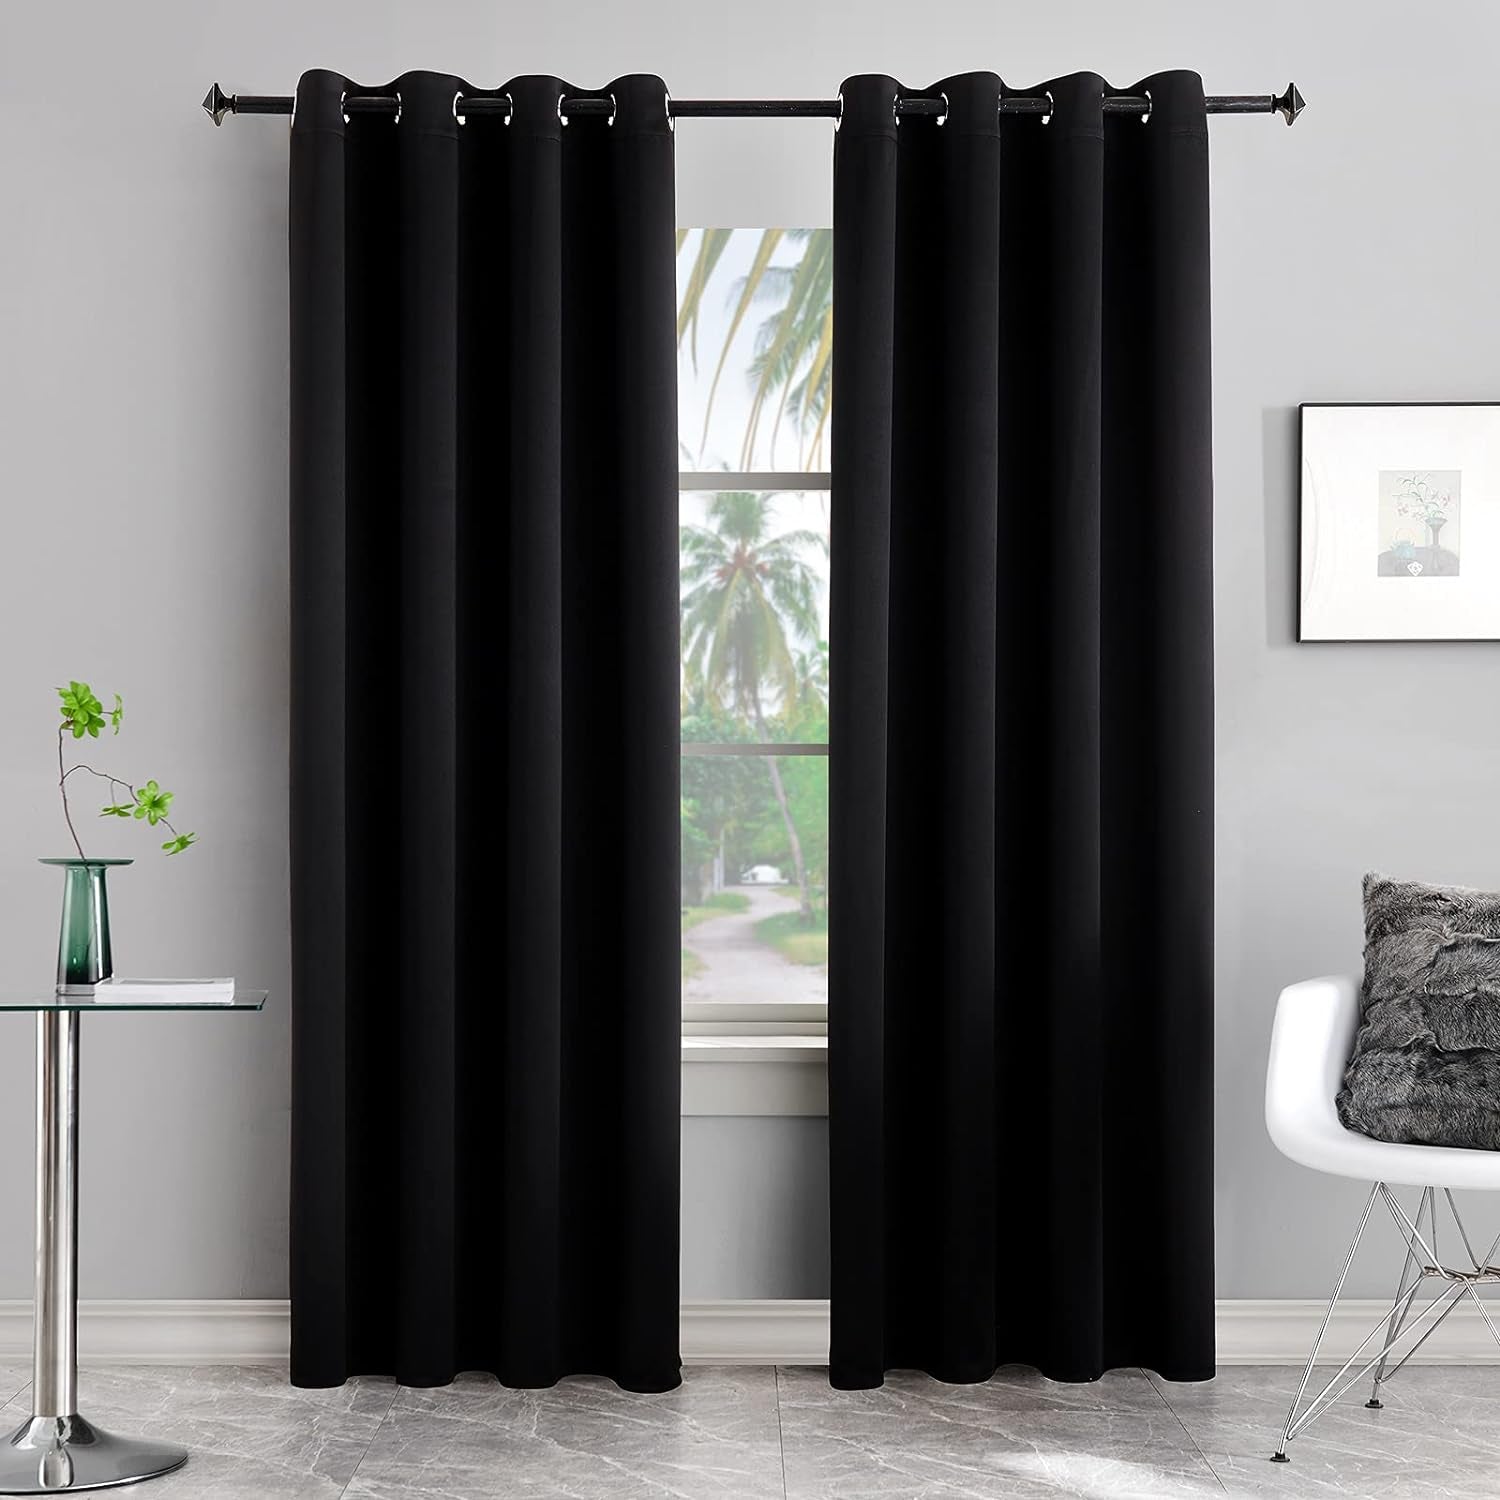 BERSWAY 99% Blackout Curtains & Drapes Panels 84 Inches Darkening Curtains - Thermal Insulated Curtain for Bedroom-Red 84 Inches Long Grommet Window Curtain 2 Panels Set,W 52" X L 84"  BERSWAY Black 52"Wx63"L 